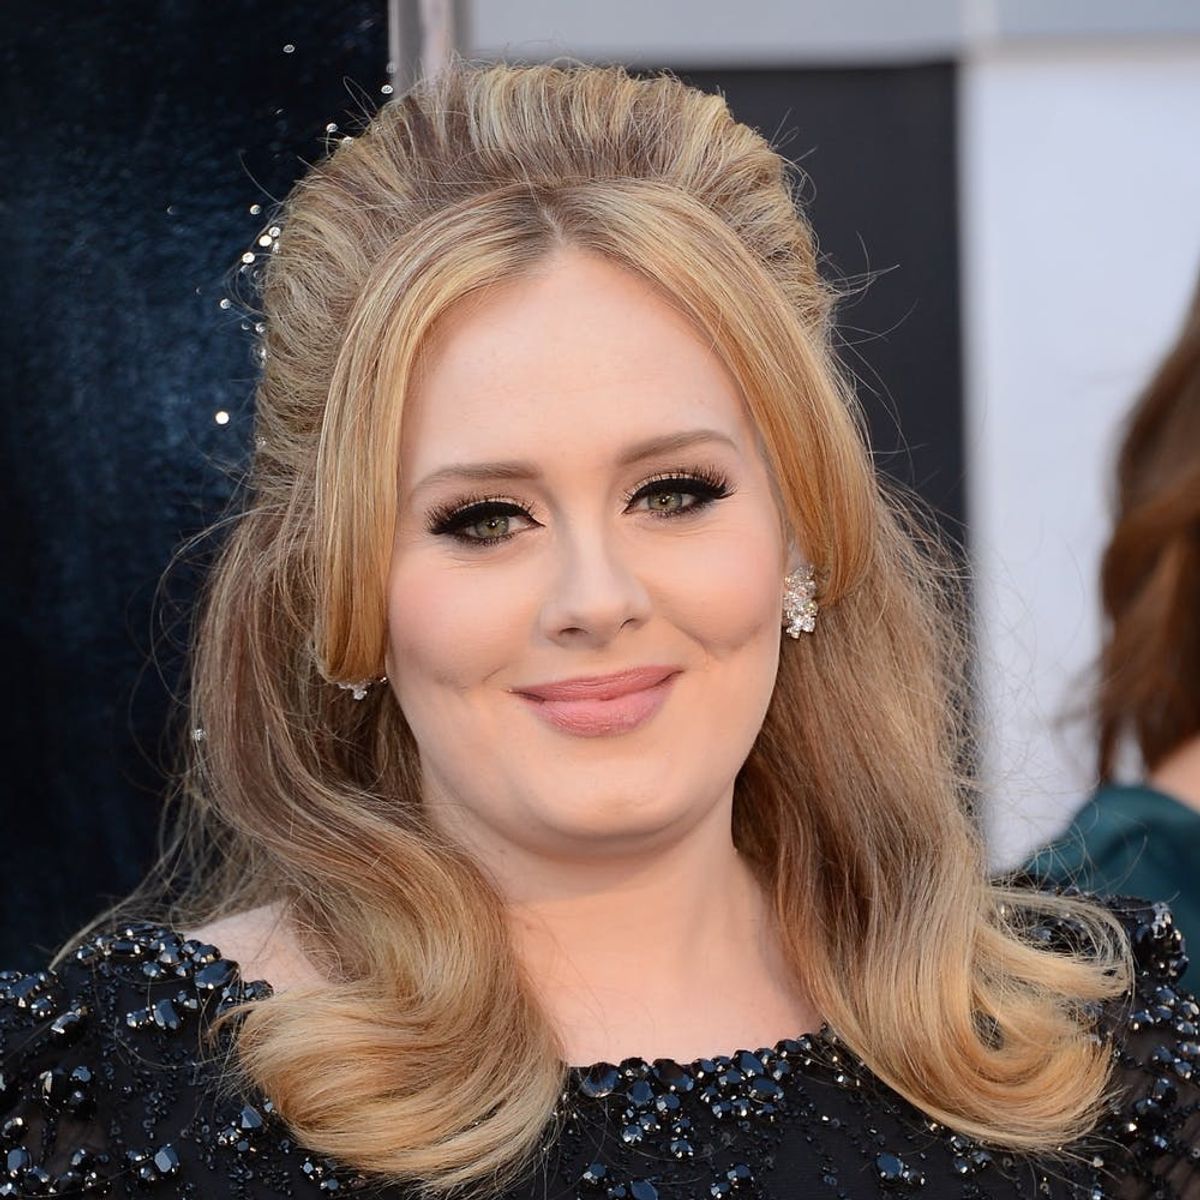 Adele’s Gym Struggle Is as Real as Ours